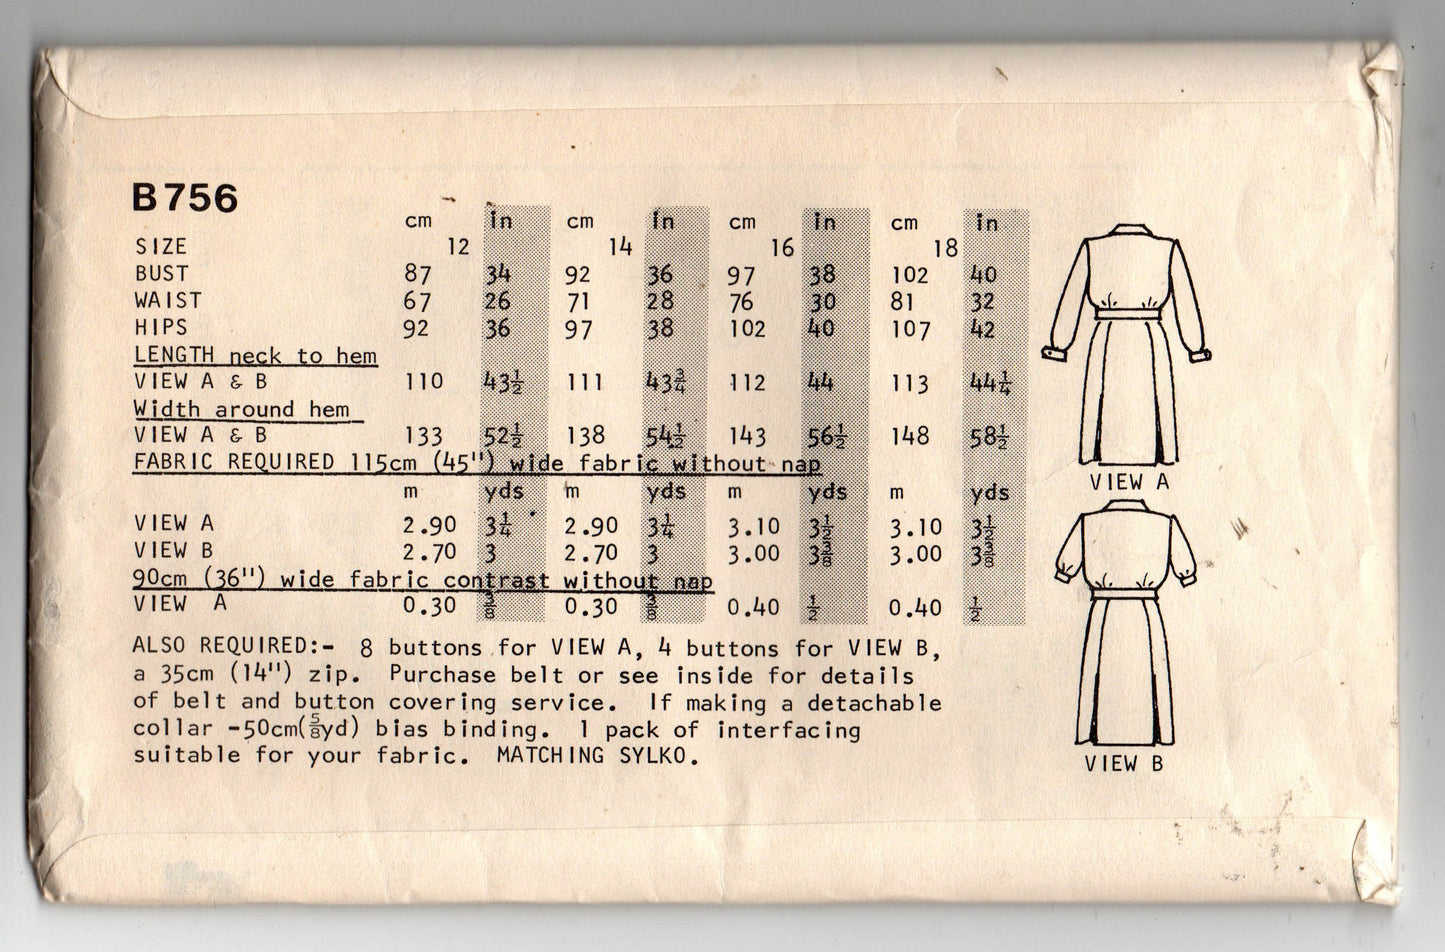 Woman's Weekly B 756 Womens Shirtdress with Pockets 1970s Vintage Sewing Pattern Size 12 Bust 34 inches UNCUT Factory Folded